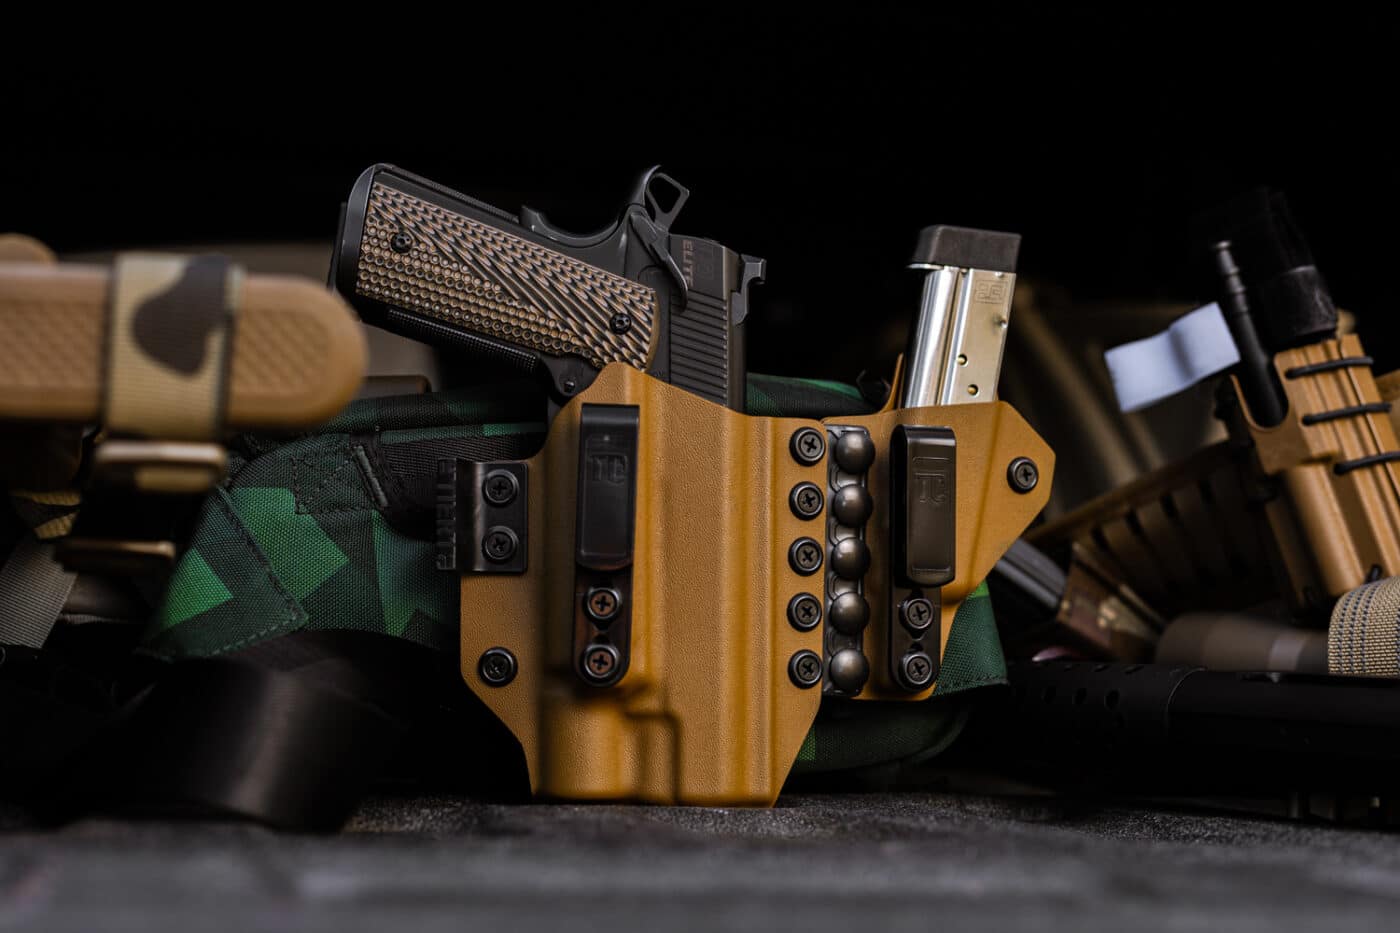 Tier 1 Agis appendix holster with pistol inside next to other gear